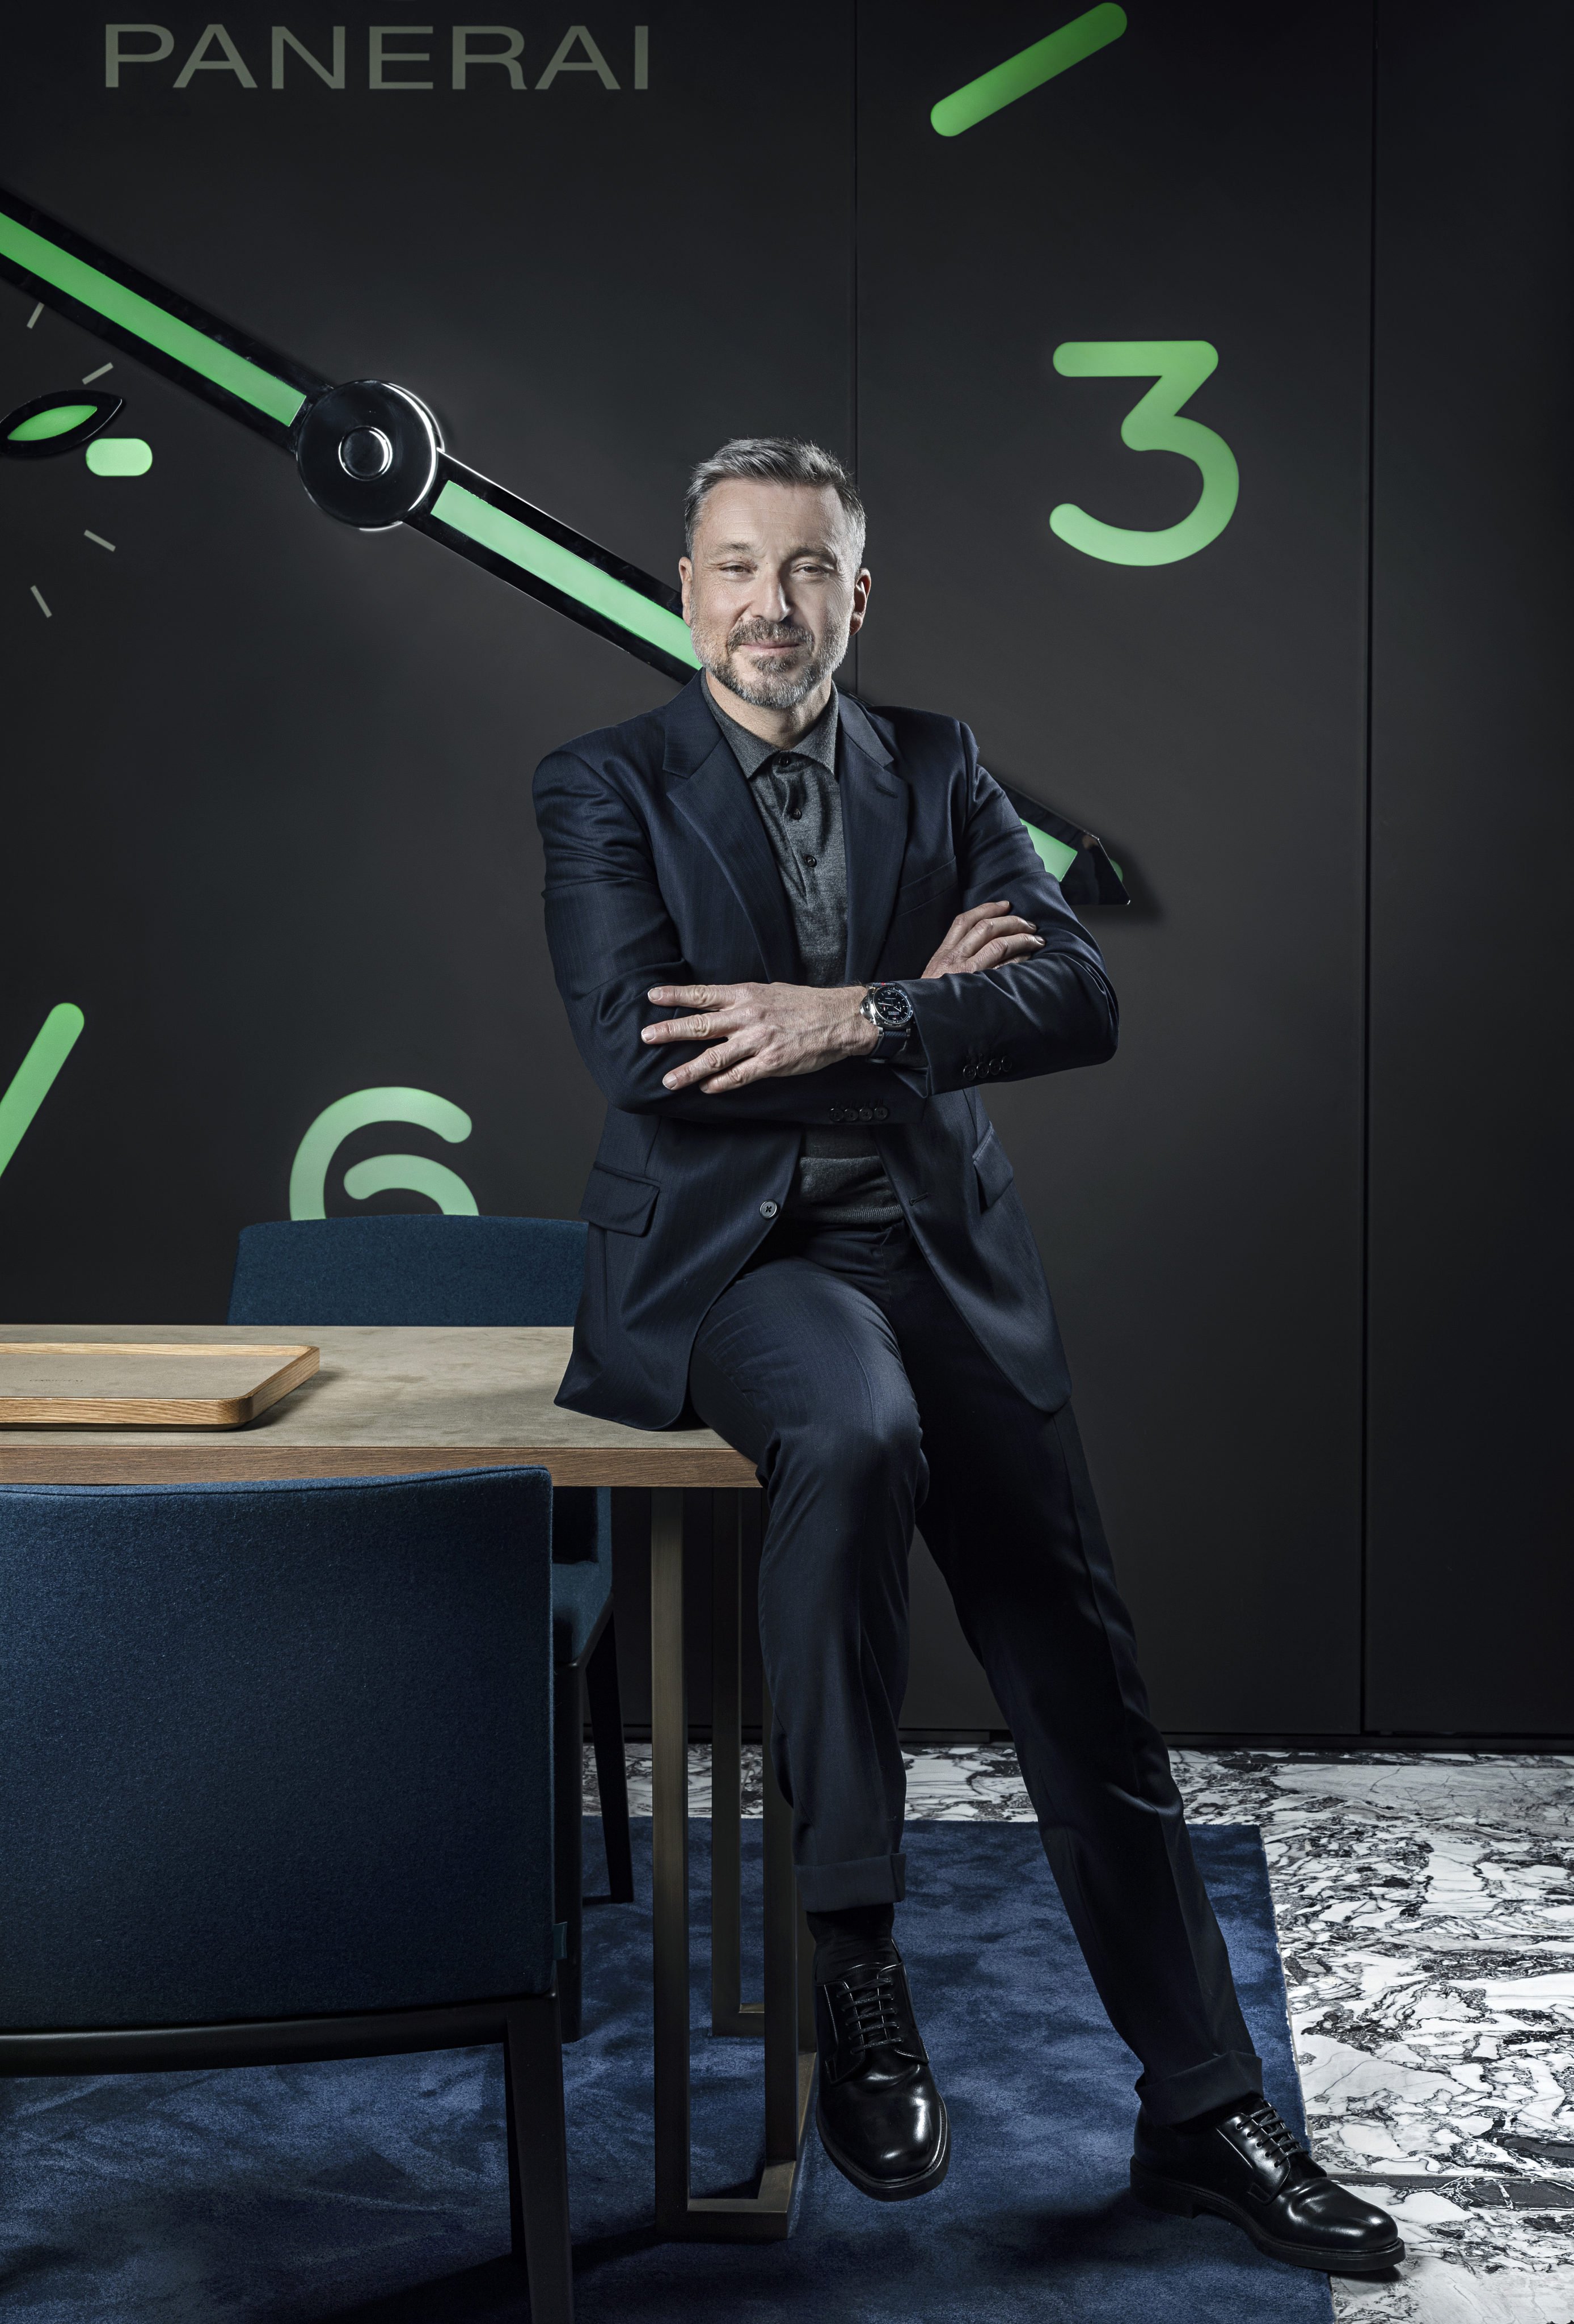 Panerai CEO Jean-Marc Pontroué tells Style how Asia is turning on to Italy’s most famous watch brand, which is shedding its traditionally masculine appeal and gaining more fans among women in the region. Photo: Panerai